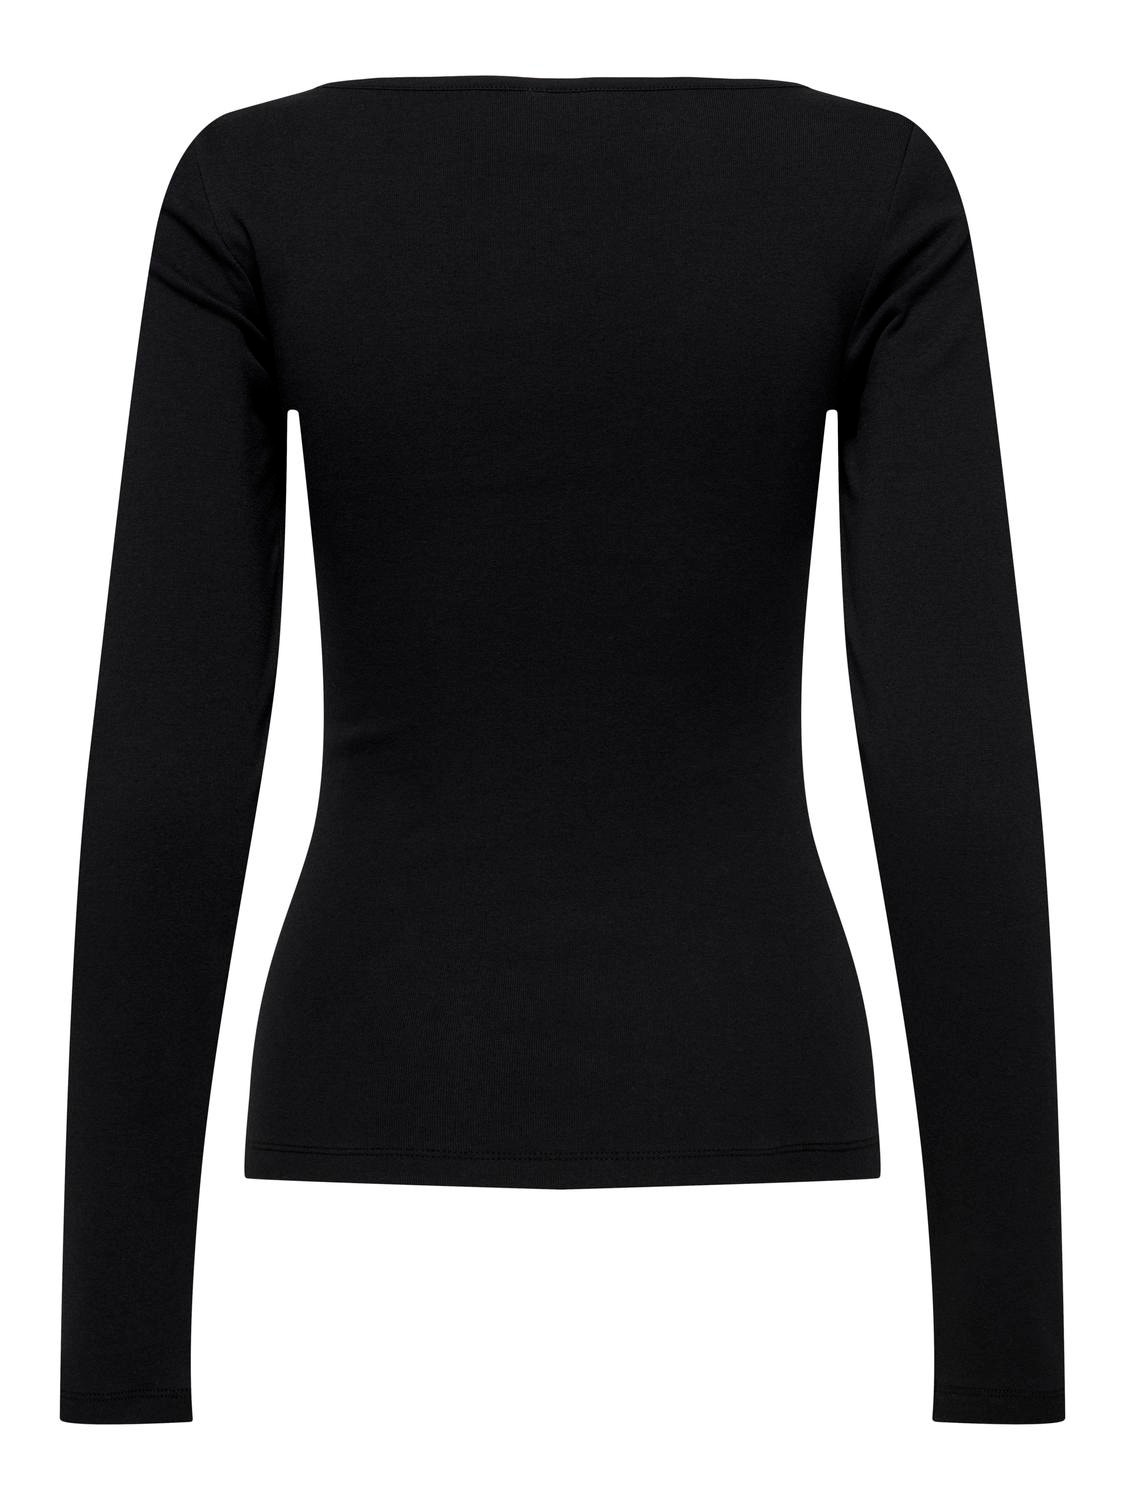 ONLY Long sleeved top with lace neck -Black - 15302894